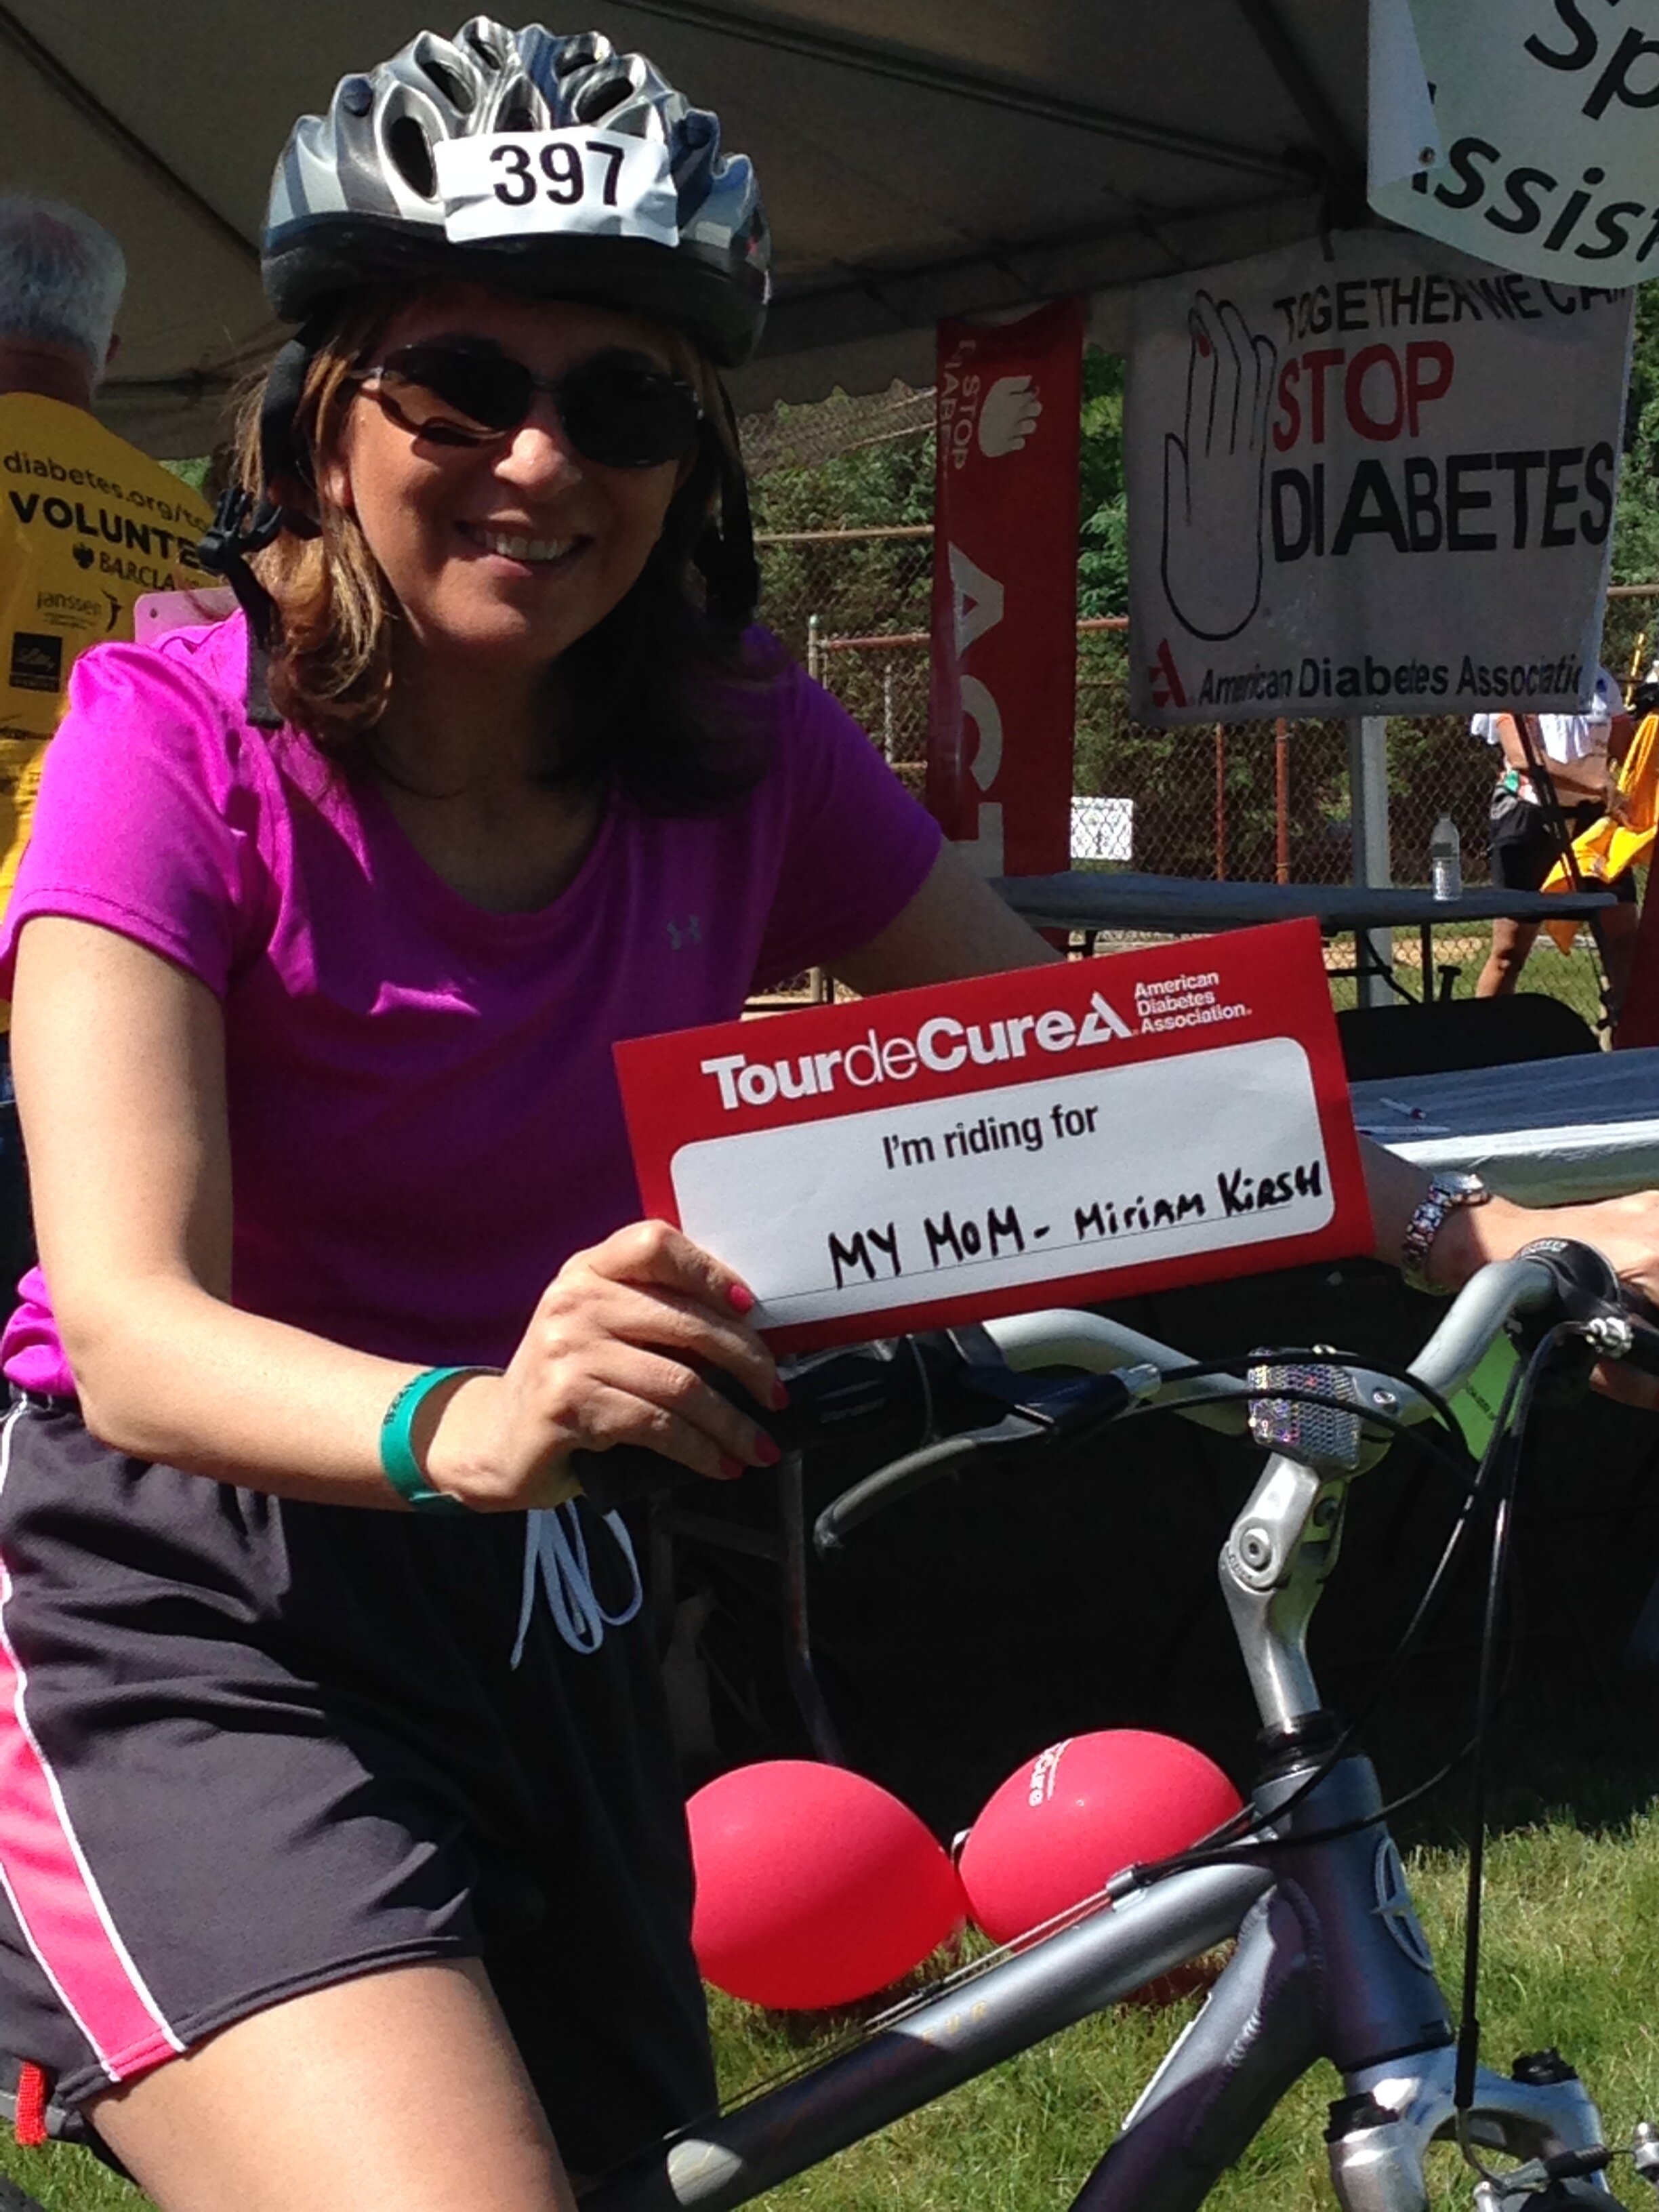 Biking the Tour de Cure for her Mother